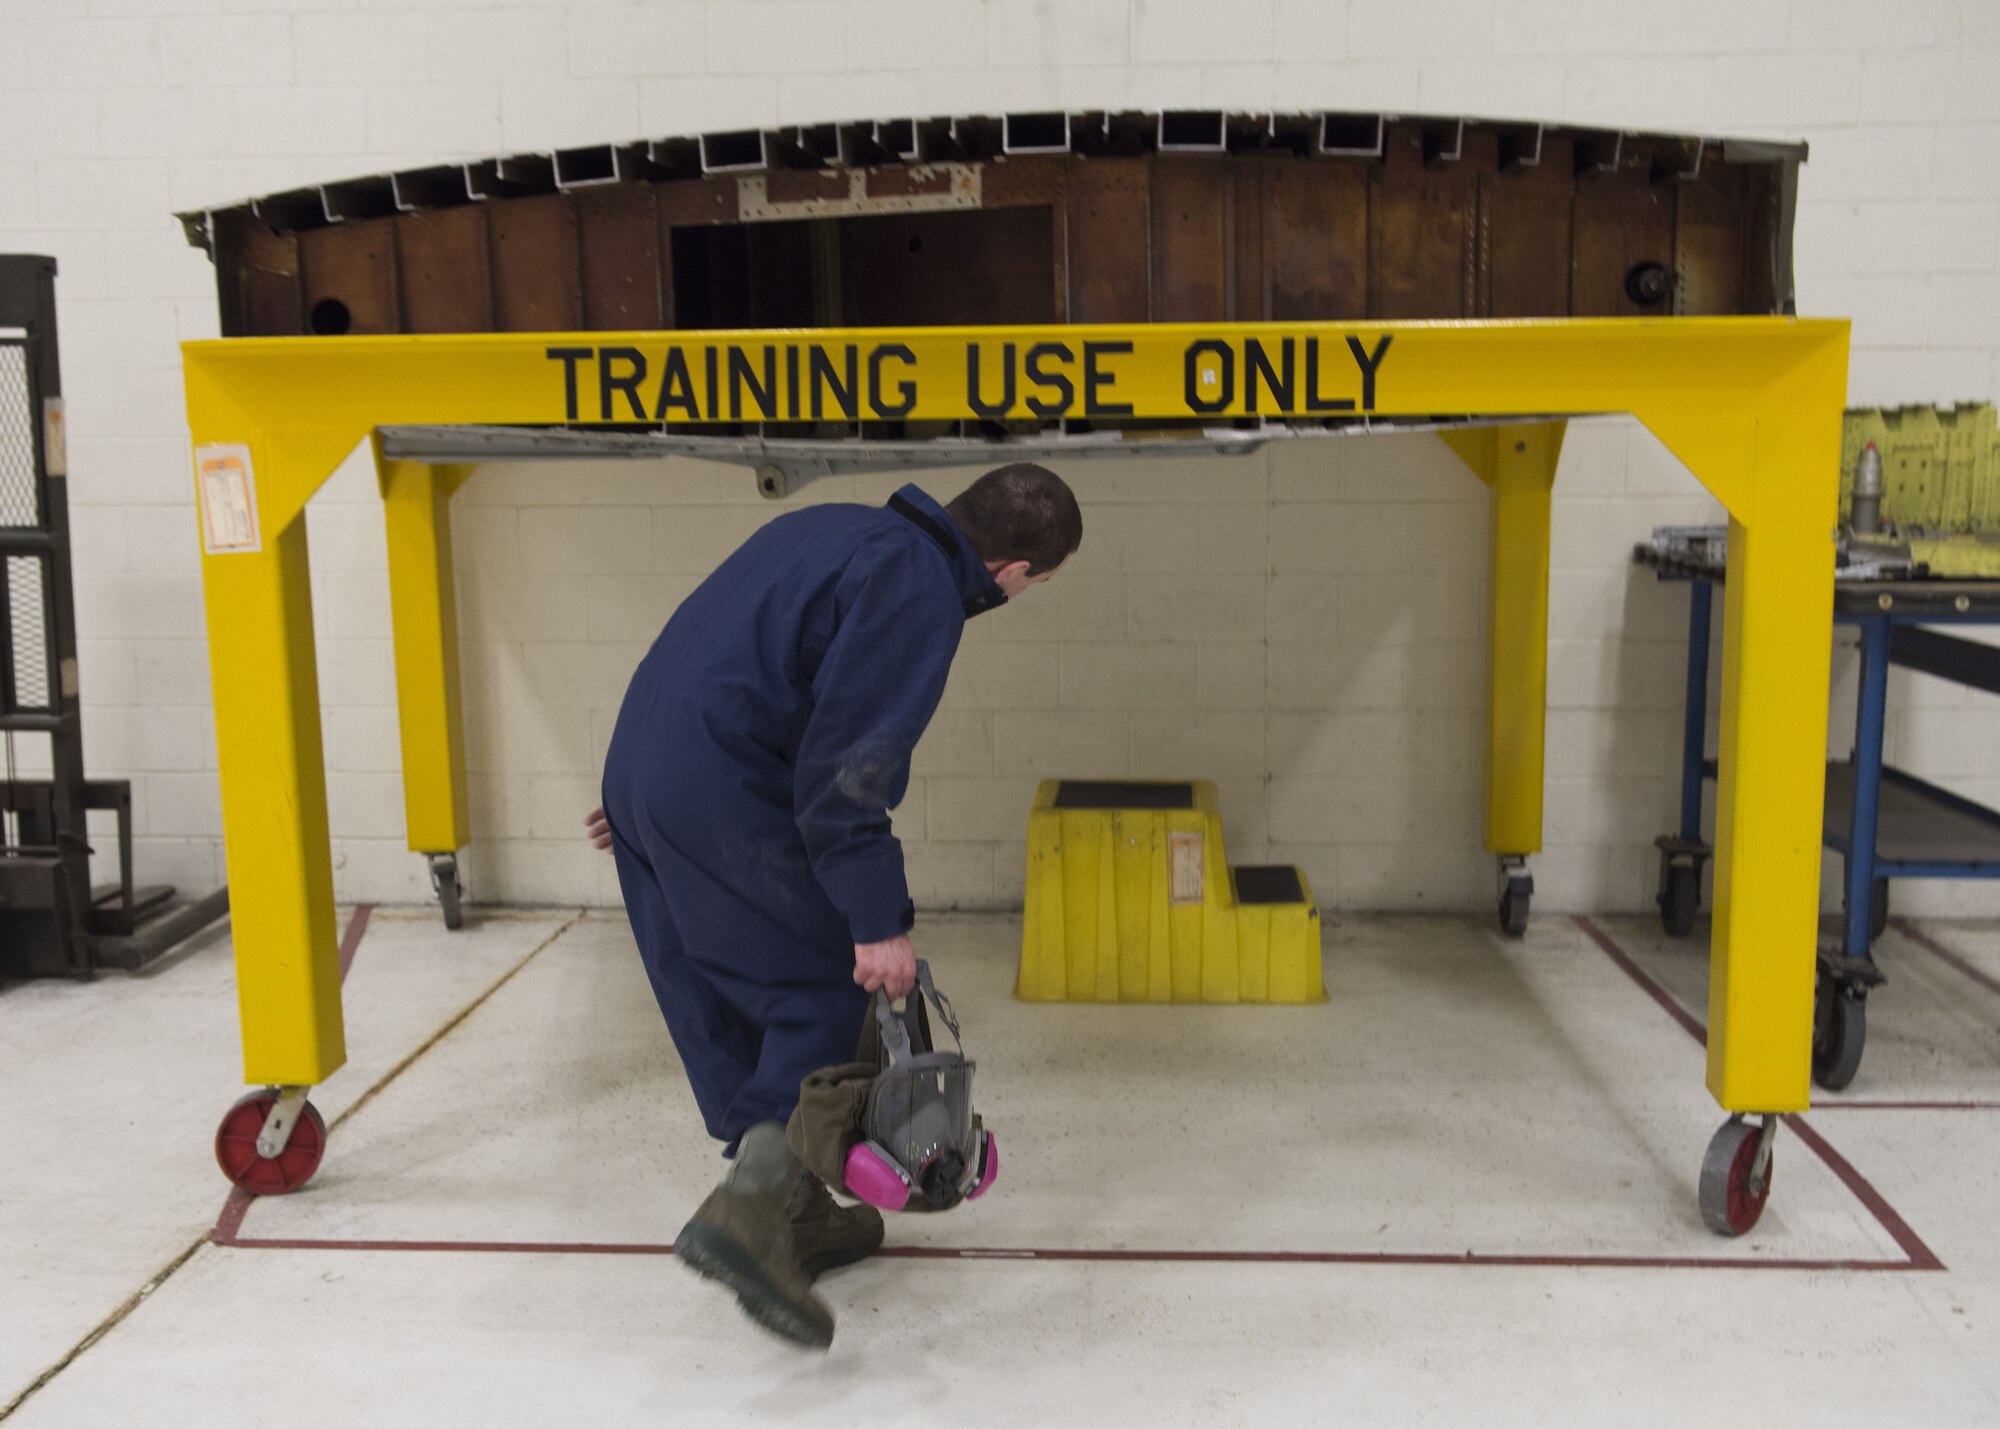 Airman 1st Class Elijah Simmons, 92nd Maintenance Squadron, Aircraft Fuel Systems Squadron apprentice, prepares to enter a fuel tank training module, a section of a former KC-135 Stratotanker wing, during a training session at Fairchild Air Force Base, Washington, Nov. 21, 2017. Fuel leaks on an aircraft can be a disaster mid-air or prevent an aircraft from possessing enough fuel pressure to even take off, making it a critical part of maintenance. (U.S. Air Force photo/Senior Airman Ryan Lackey)